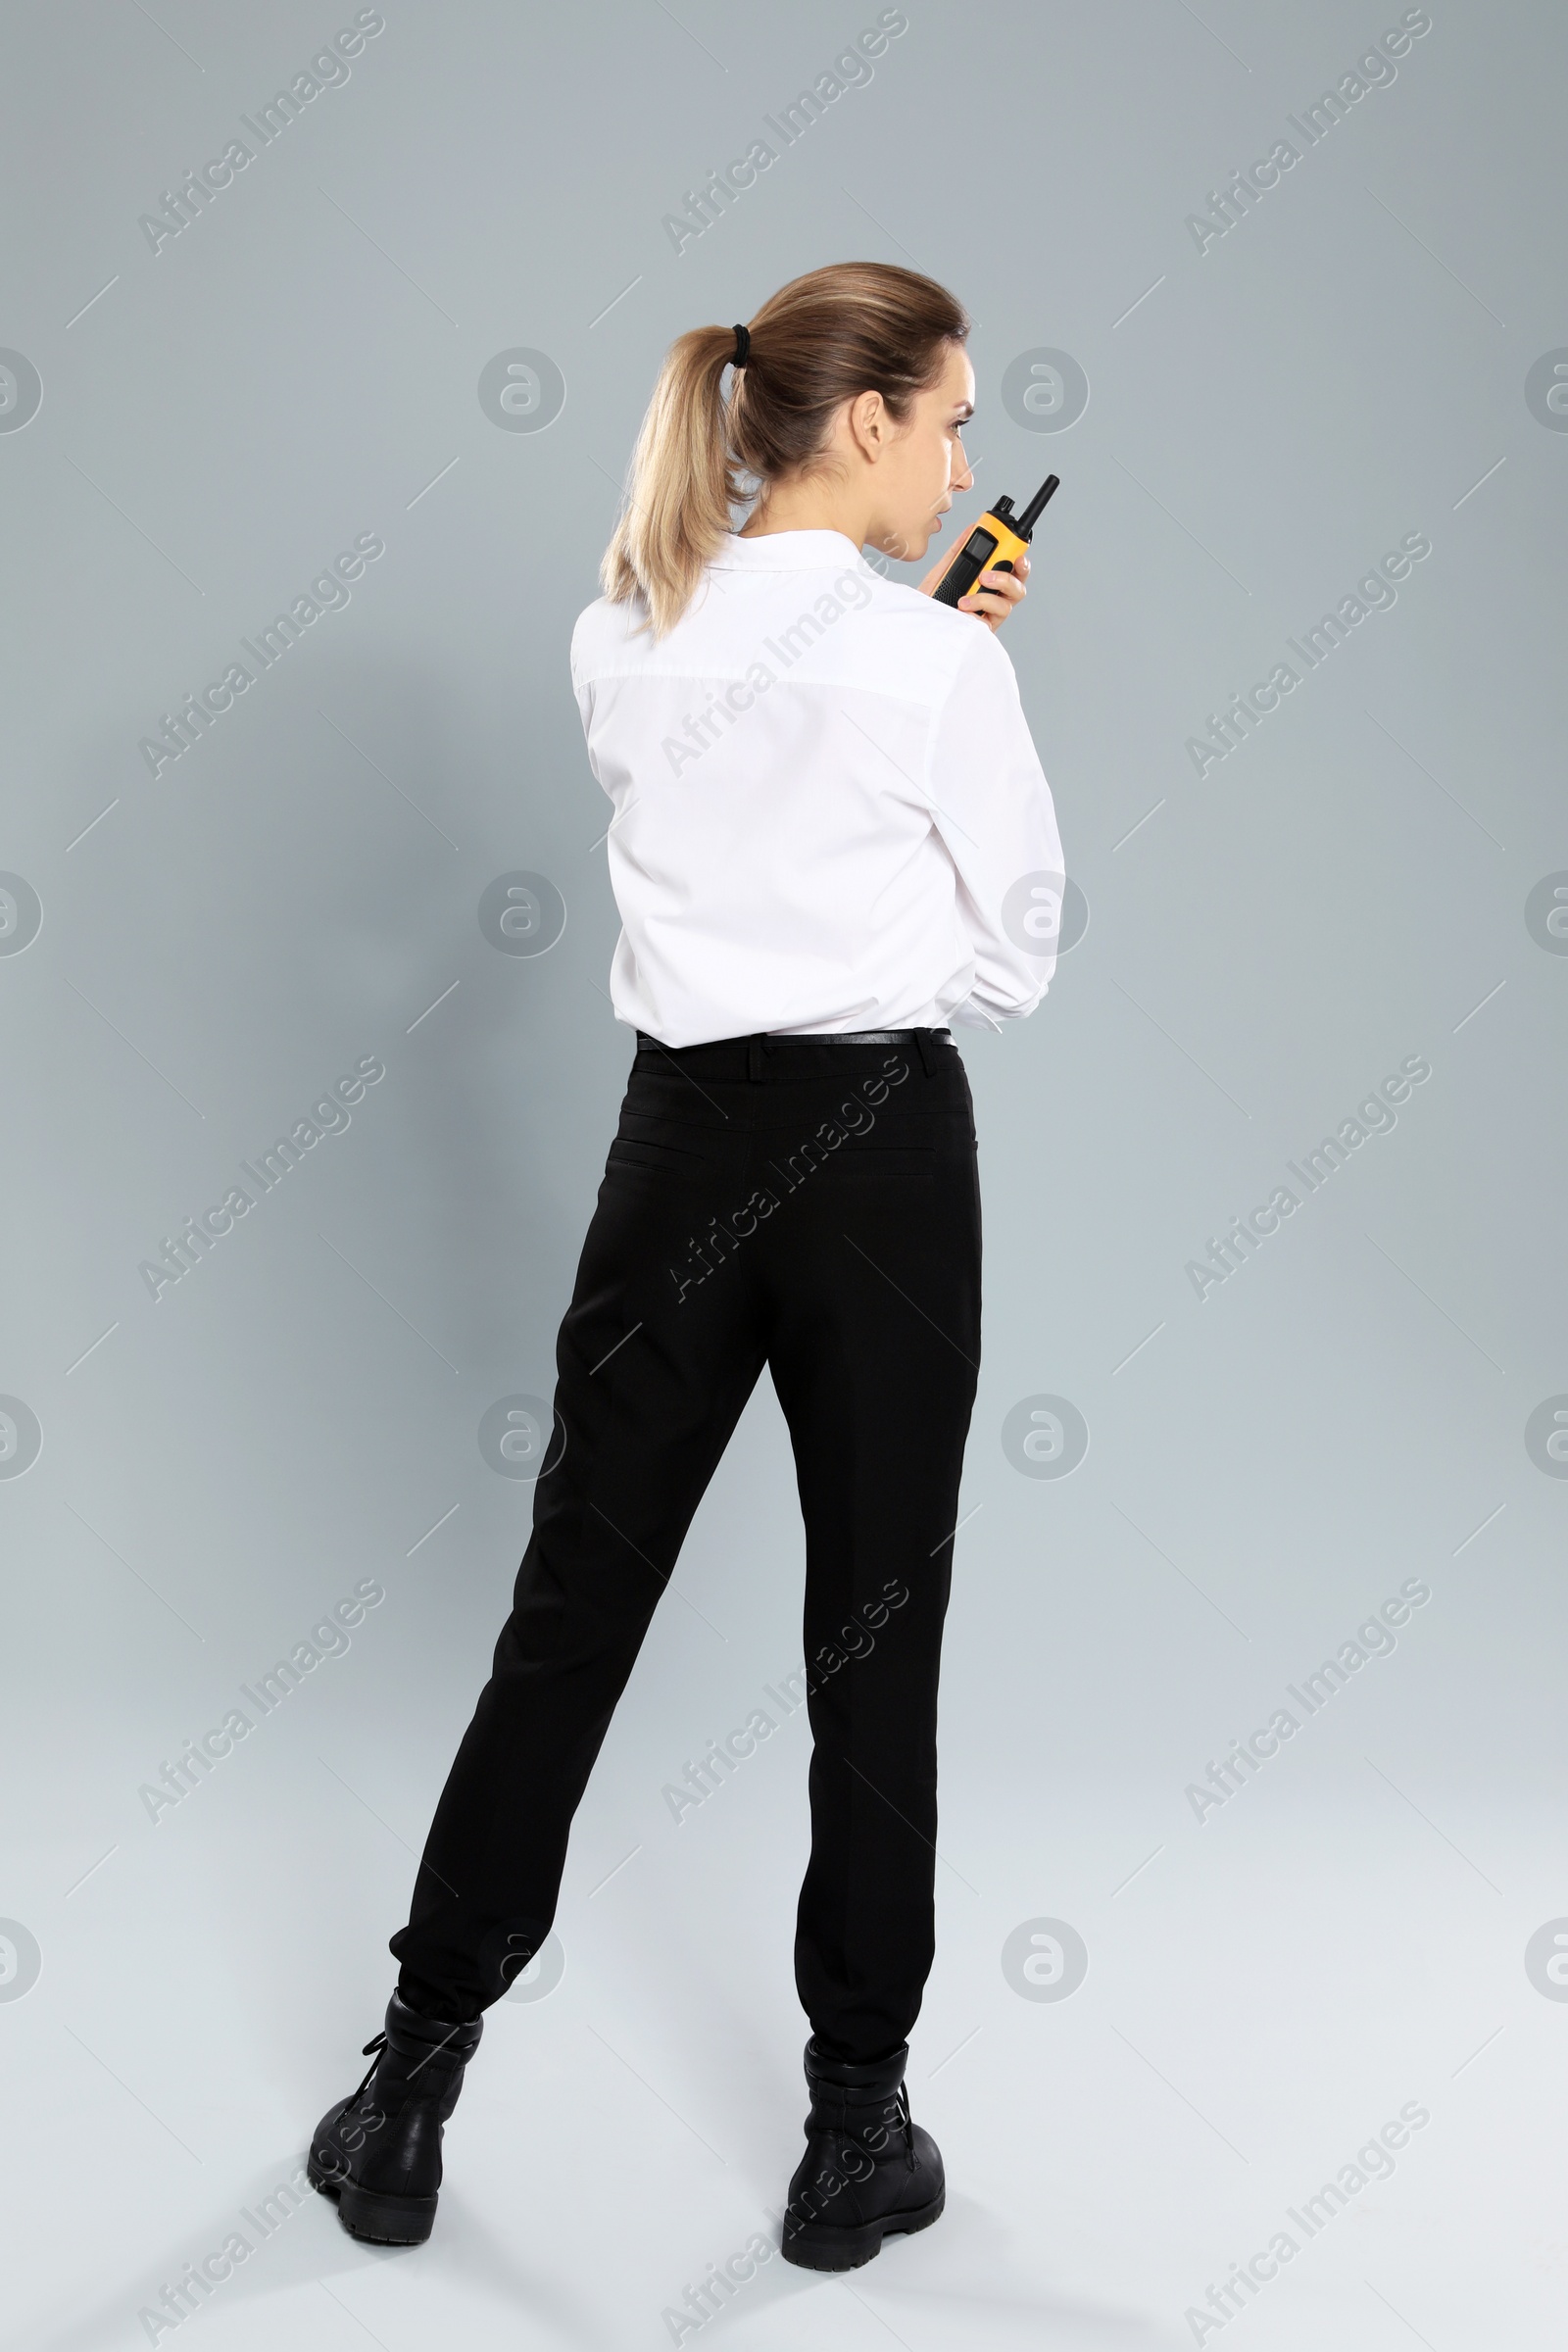 Photo of Female security guard in uniform using portable radio transmitter on grey background